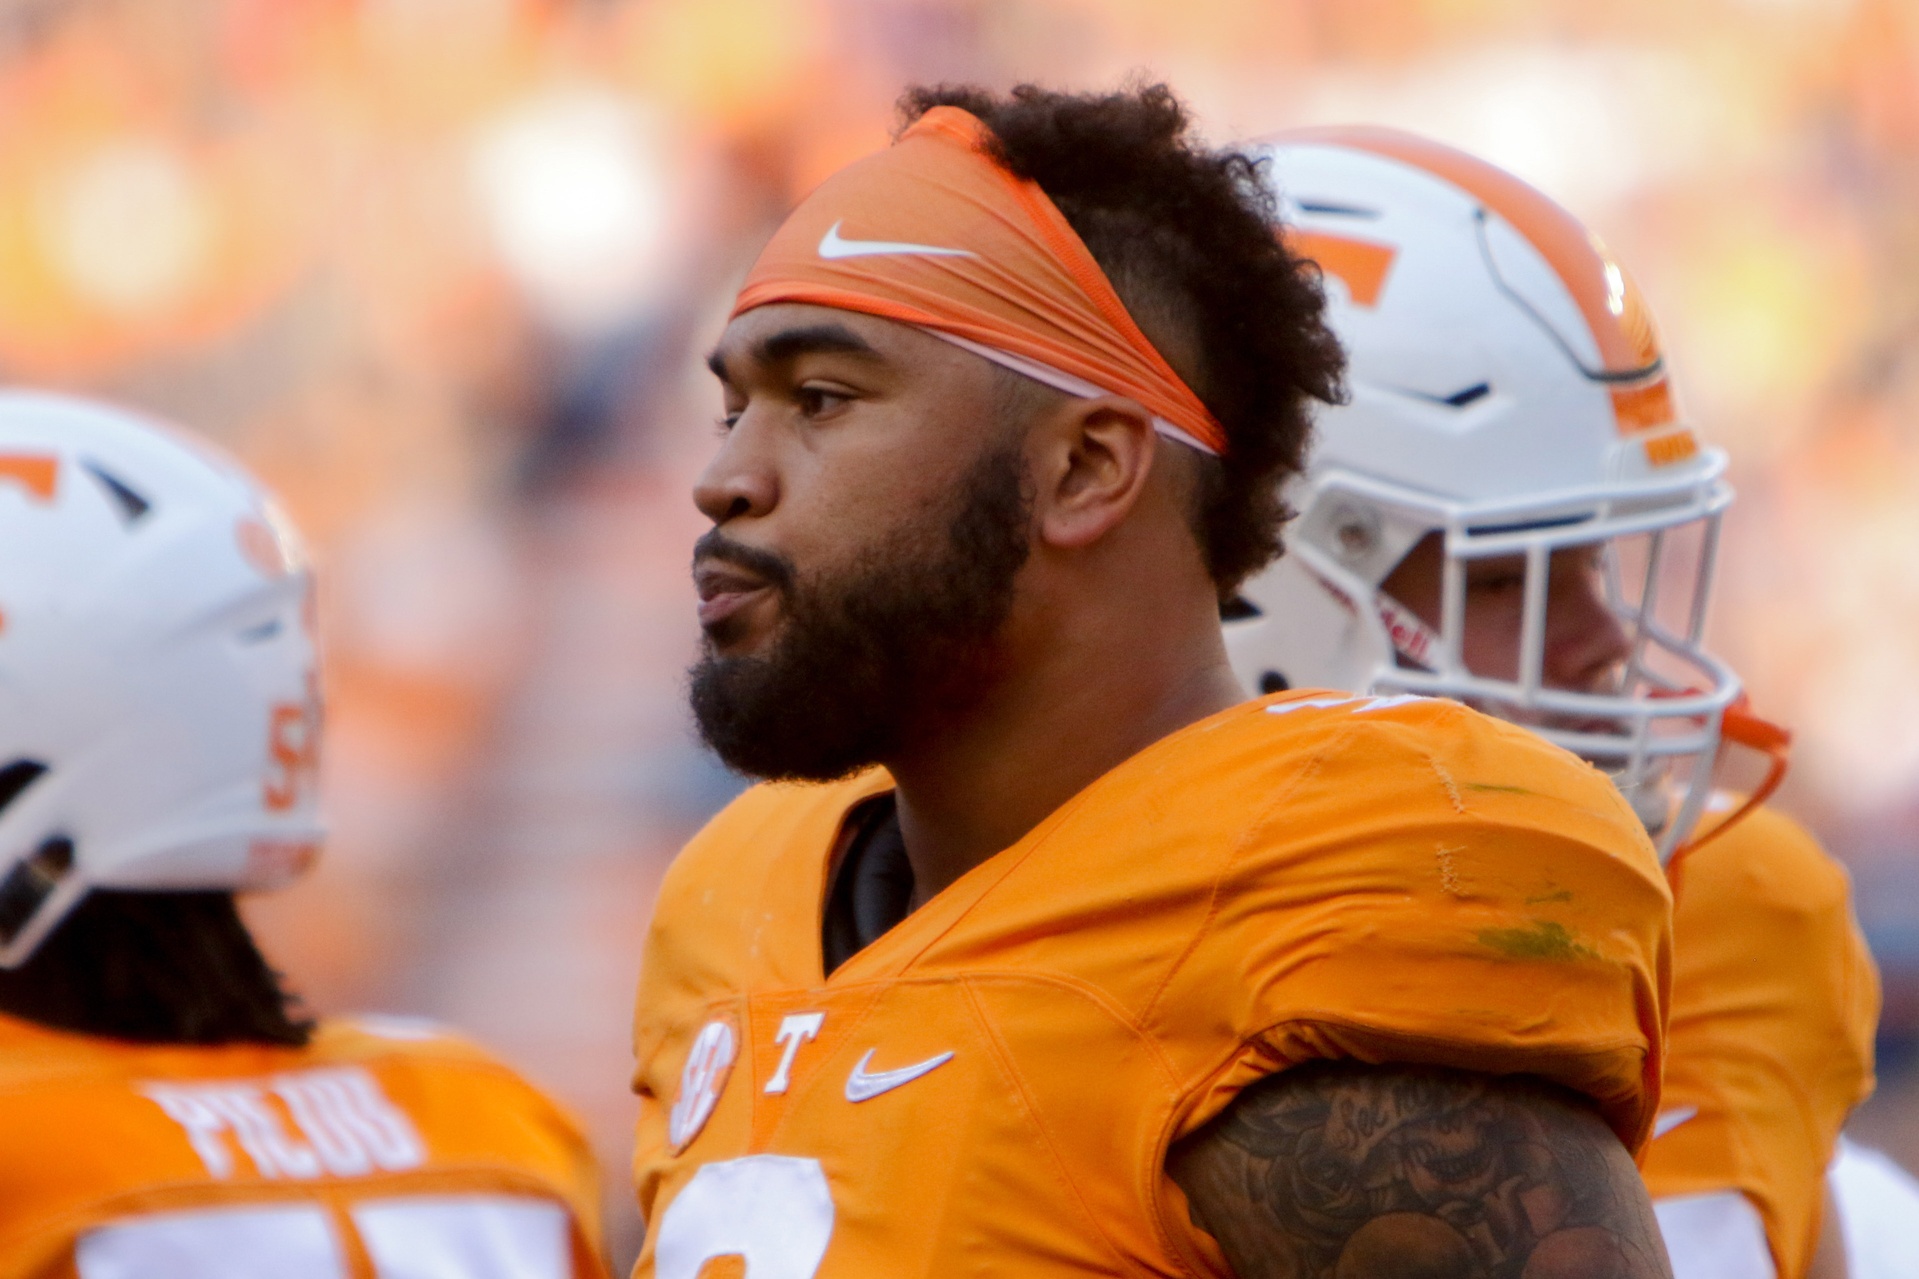 Nov 5, 2016; Knoxville, TN, USA; Tennessee Volunteers defensive end Derek Barnett (9) during the second quarter against the Tennessee Tech Golden Eagles at Neyland Stadium. Mandatory Credit: Randy Sartin-USA TODAY Sports